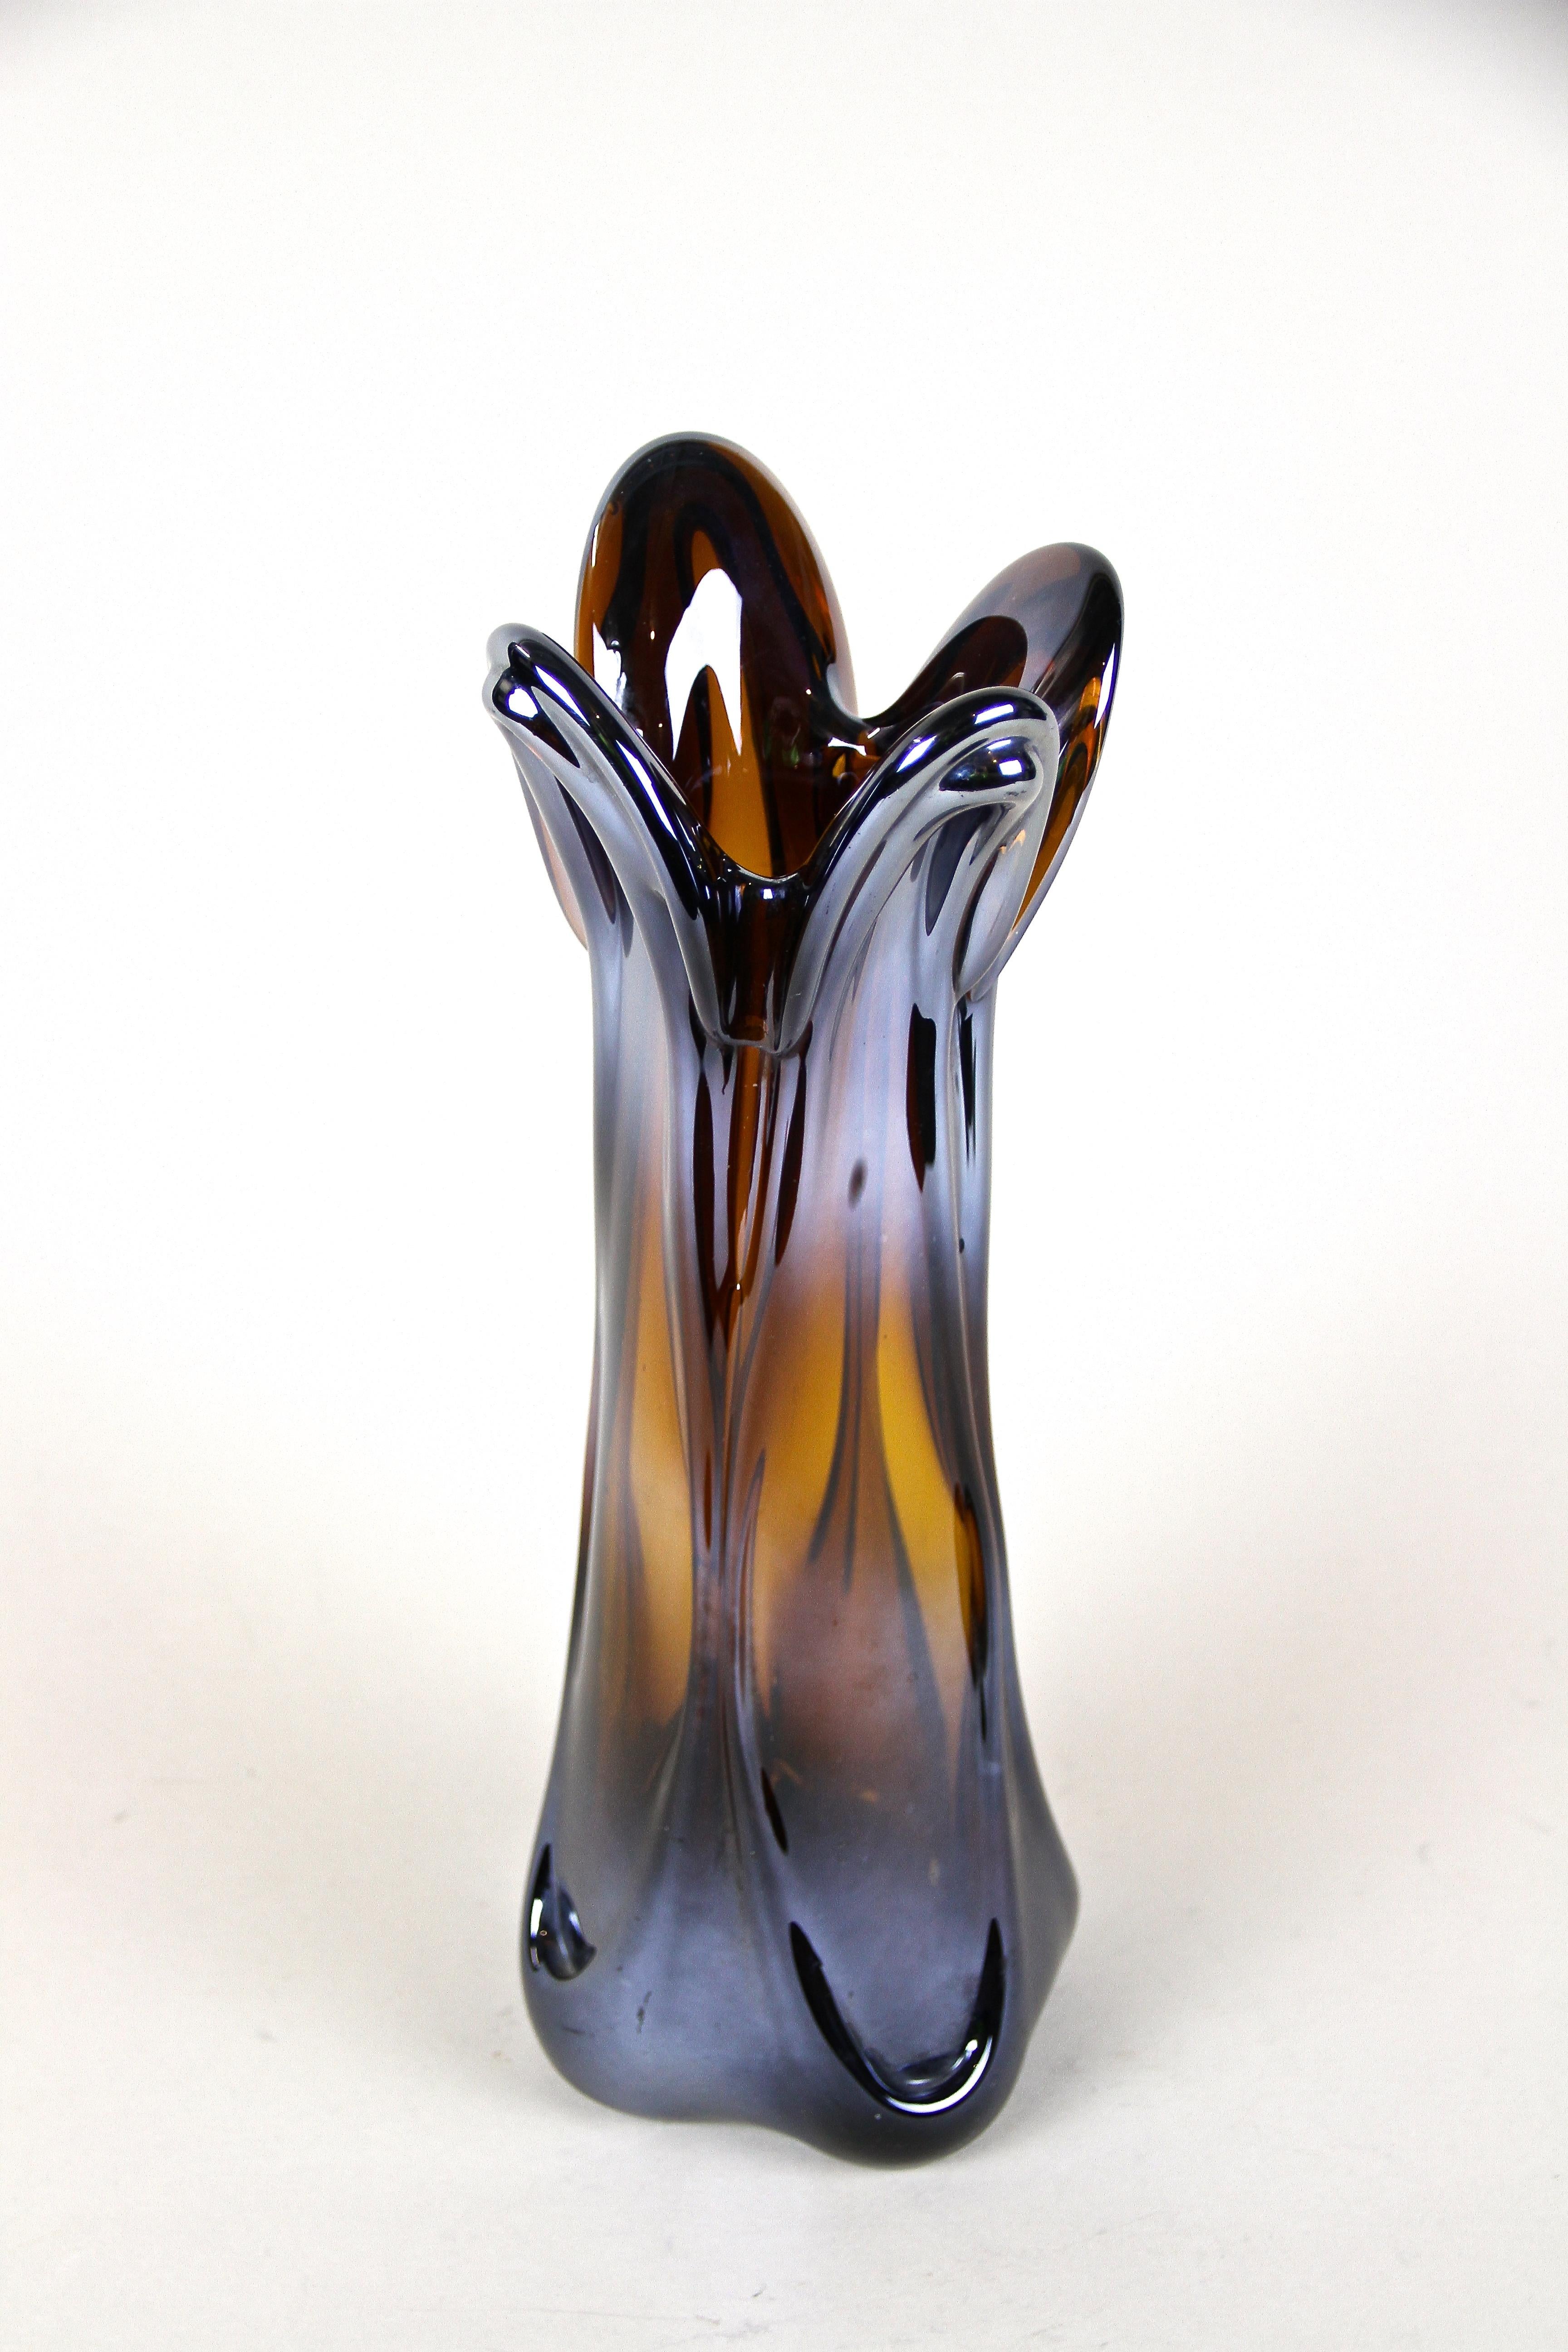 Iridiscent Murano Glass Vase Amber Colored with Chrome Effect, Italy circa 1970 For Sale 3